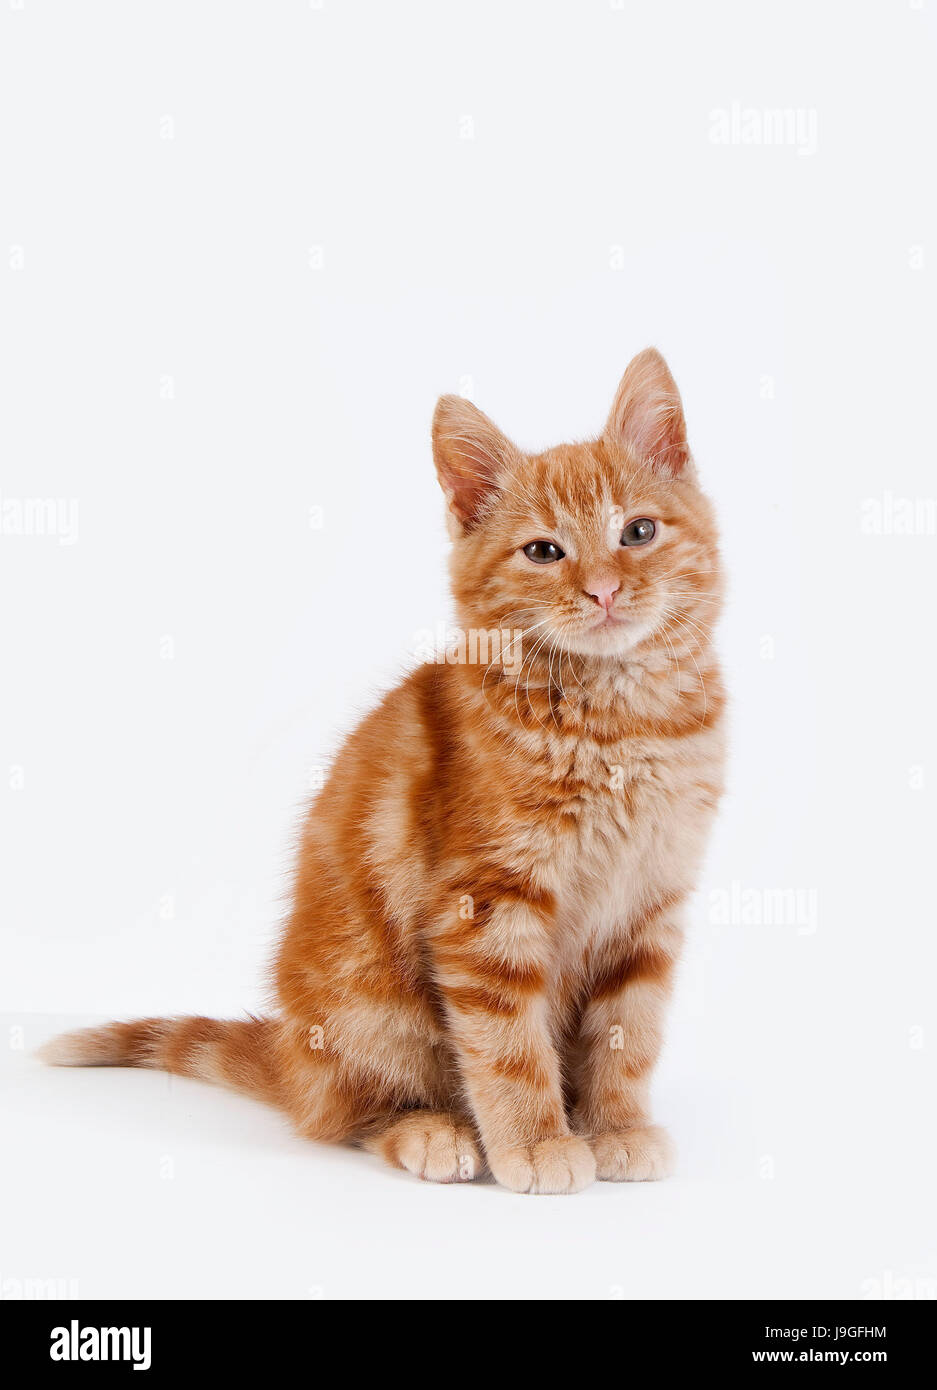 Red Tabby chat domestique, chaton contre fond blanc Banque D'Images